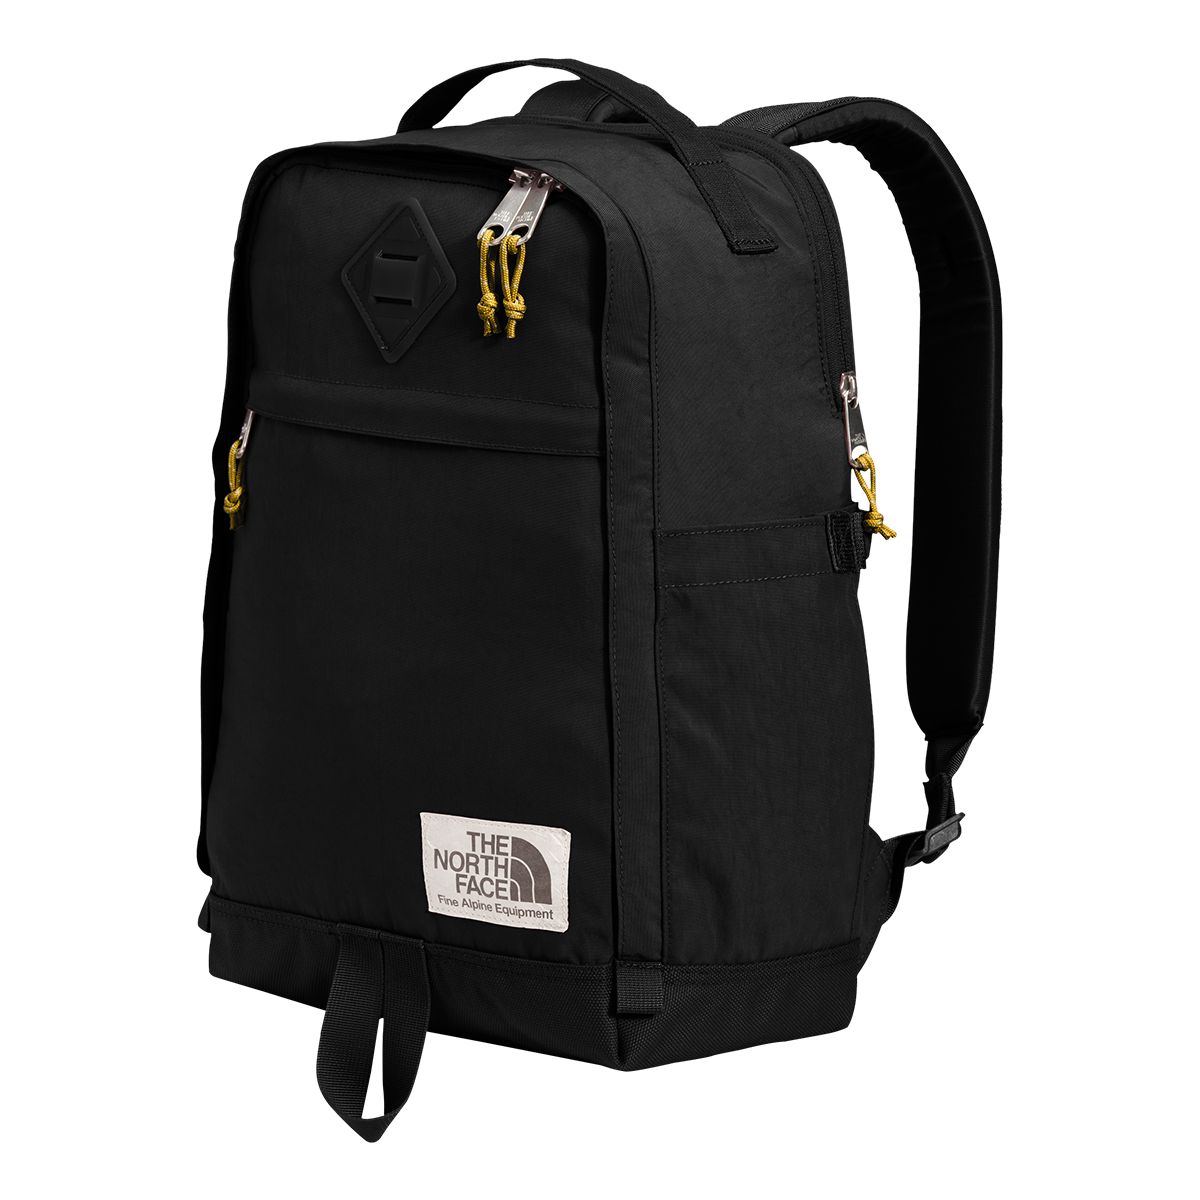 Image of The North Face Berkeley 16L Daypack